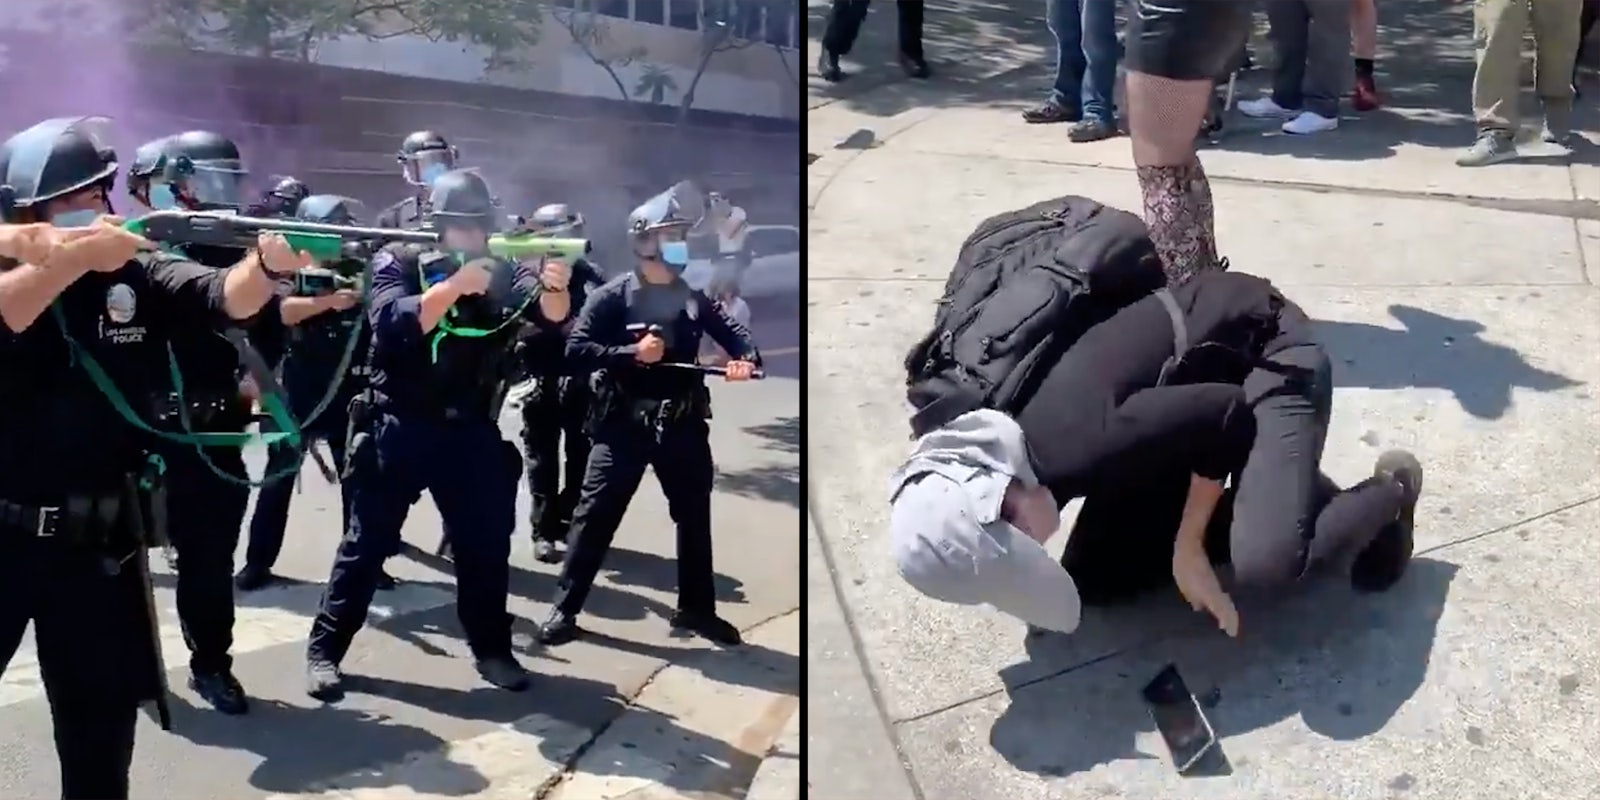 Cops with guns (L) and a woman falling to the ground (R).